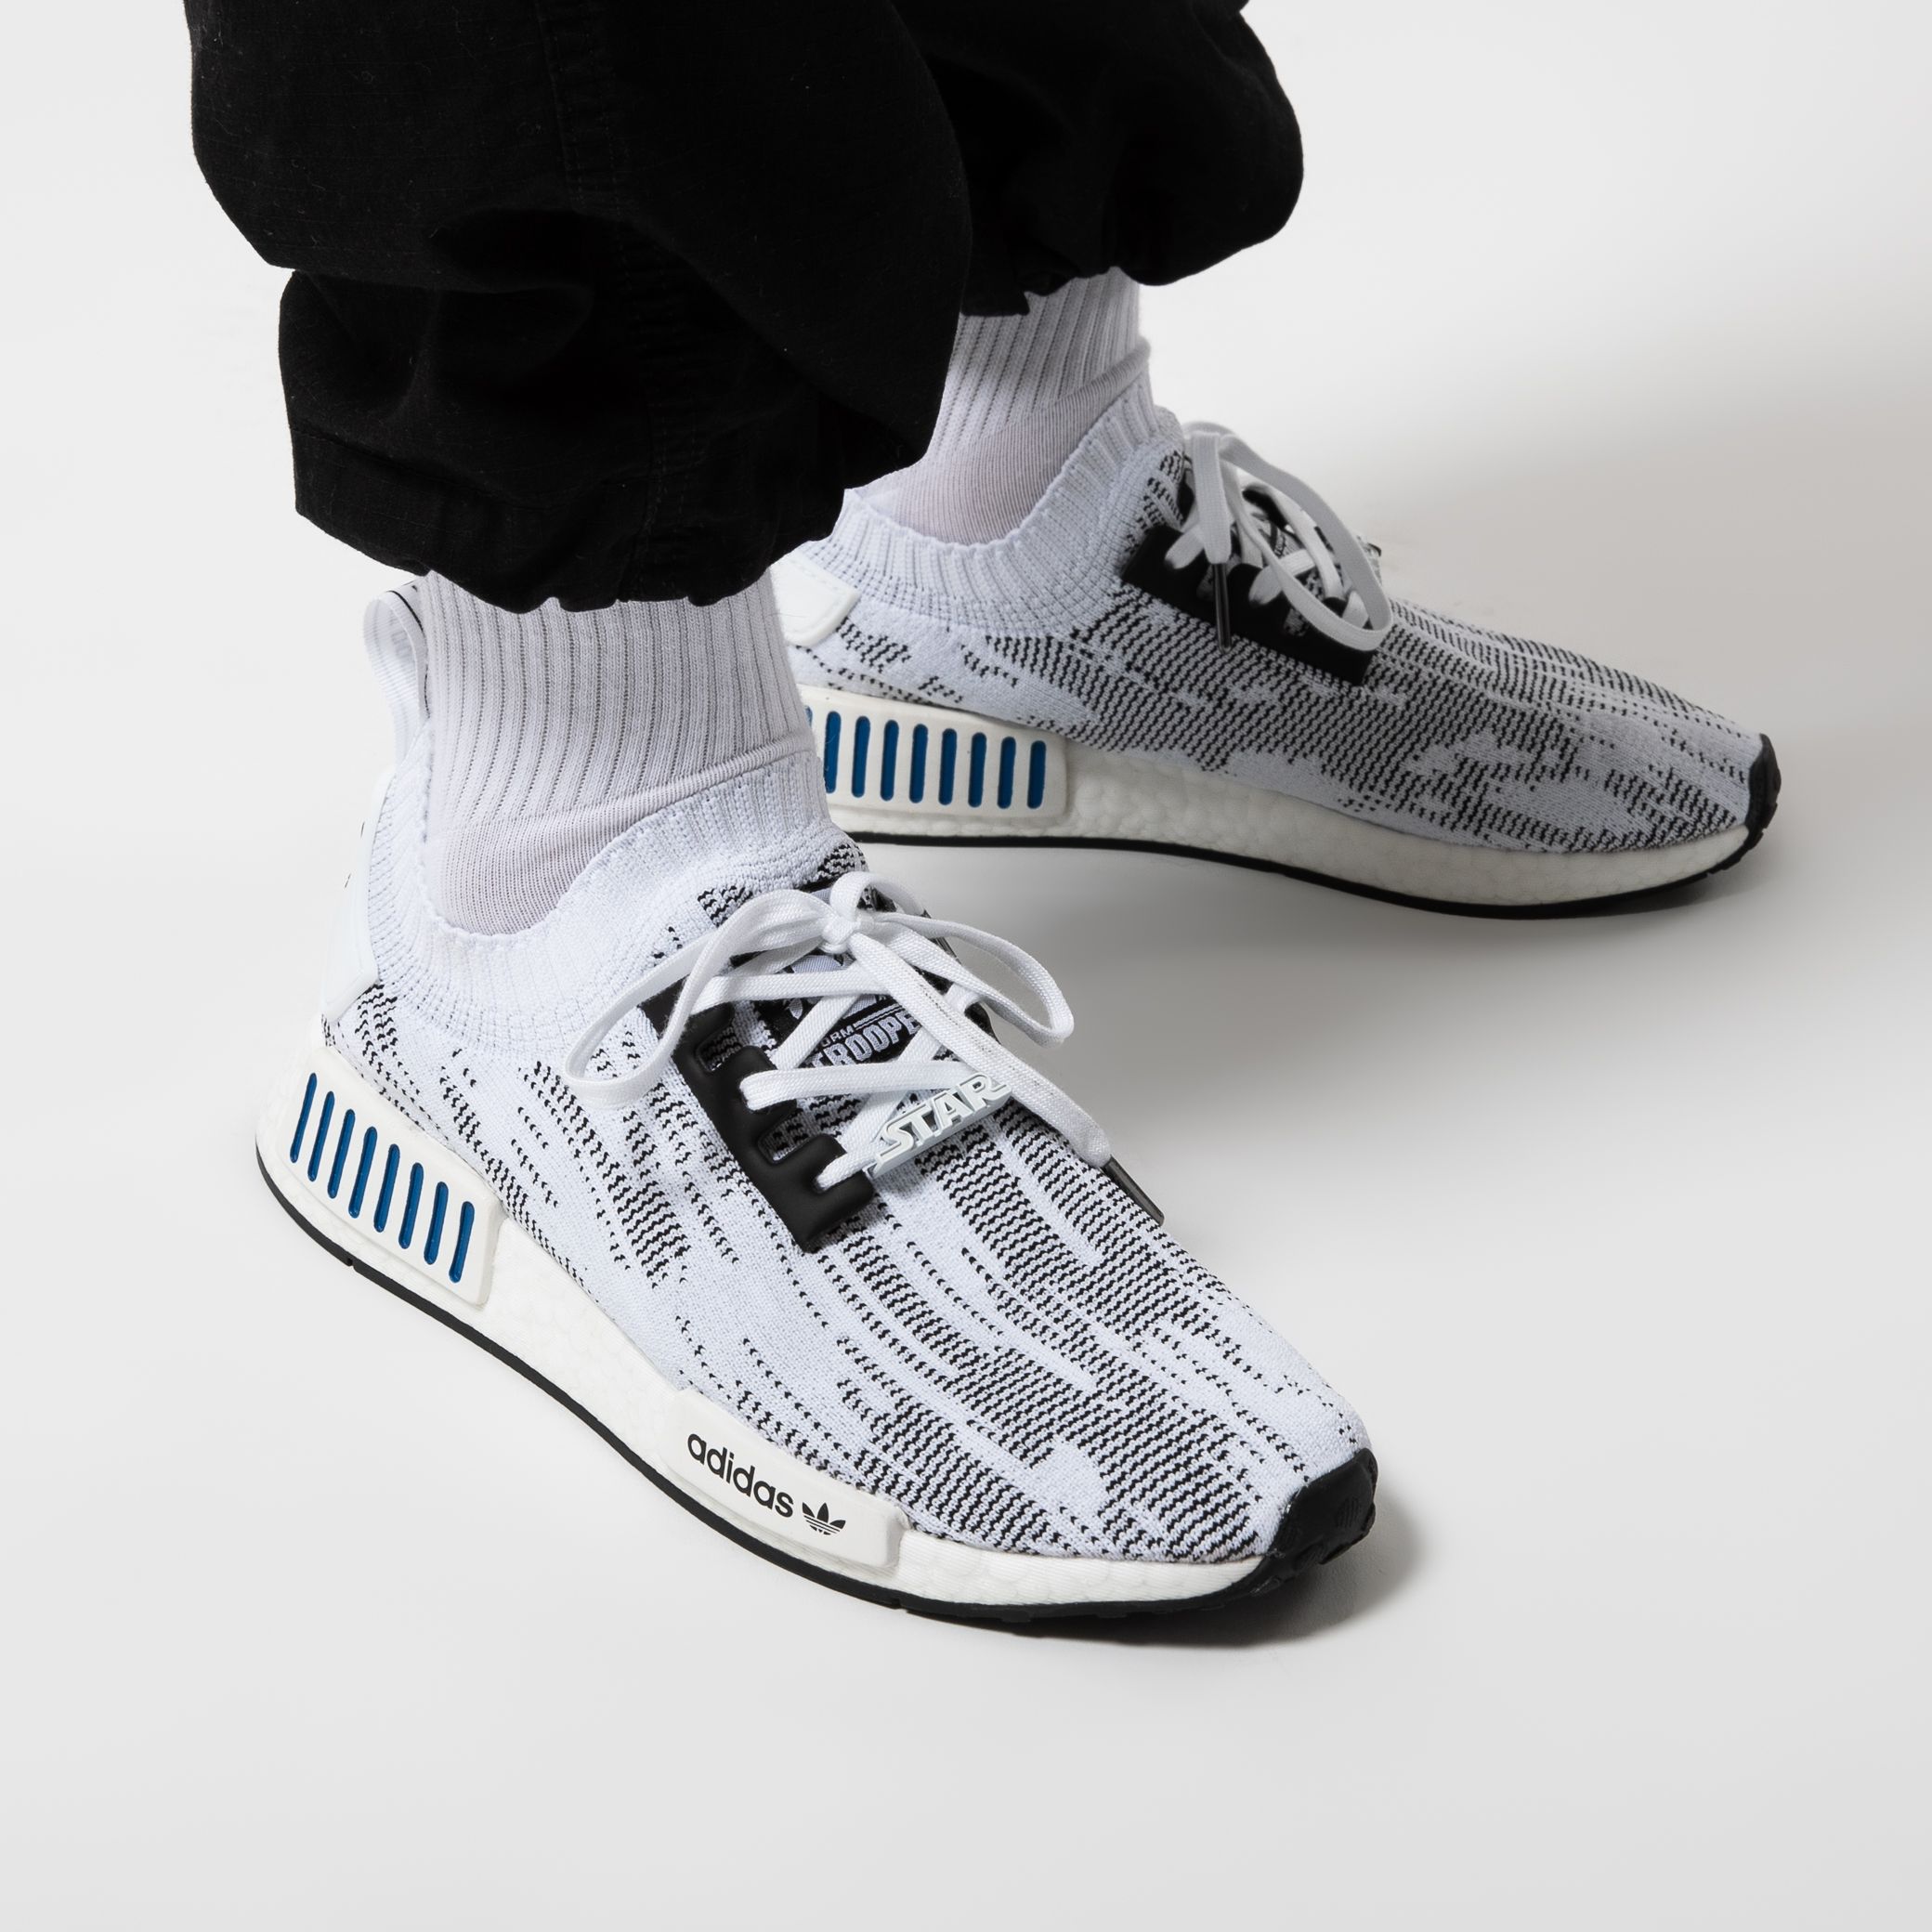 Titolo on Twitter: "ONLINE NOW 🔥 STAR WARS X ADIDAS NMD R1 - STORMTROOPER shop ➡️ https://t.co/Tg5IPiGkUy ⁠ UK 7.5 (41 1/3) - UK 10.5 (45 1/3)⁠ 🔎 FY2457⁠ ⁠ #titoloSHOP⁠ #adidas #starwars #stormtrooper https://t.co ...